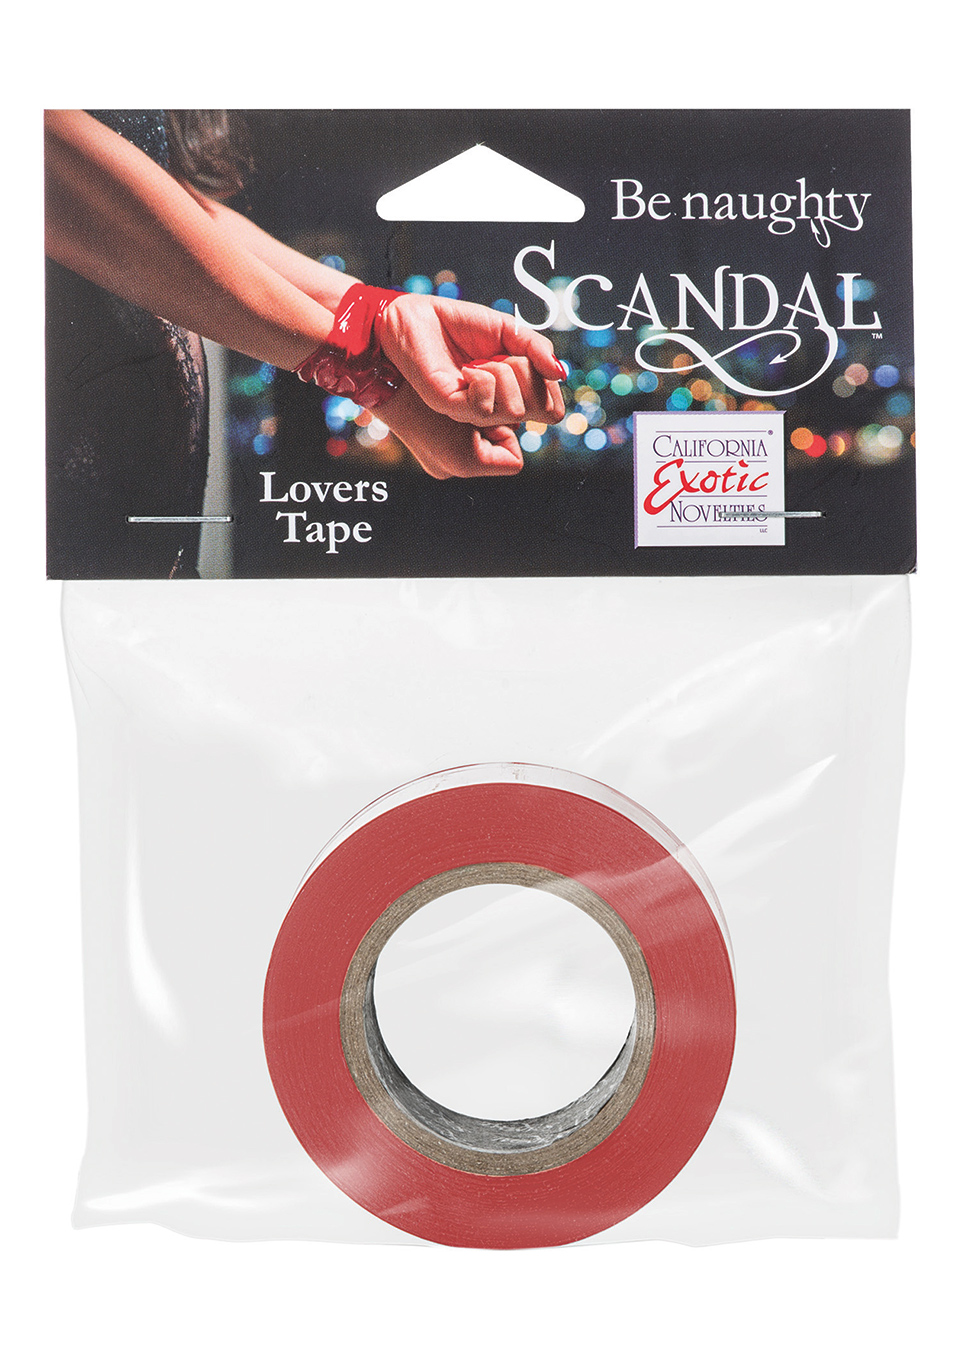 Wiązania-SCANDAL LOVERS TAPE RED